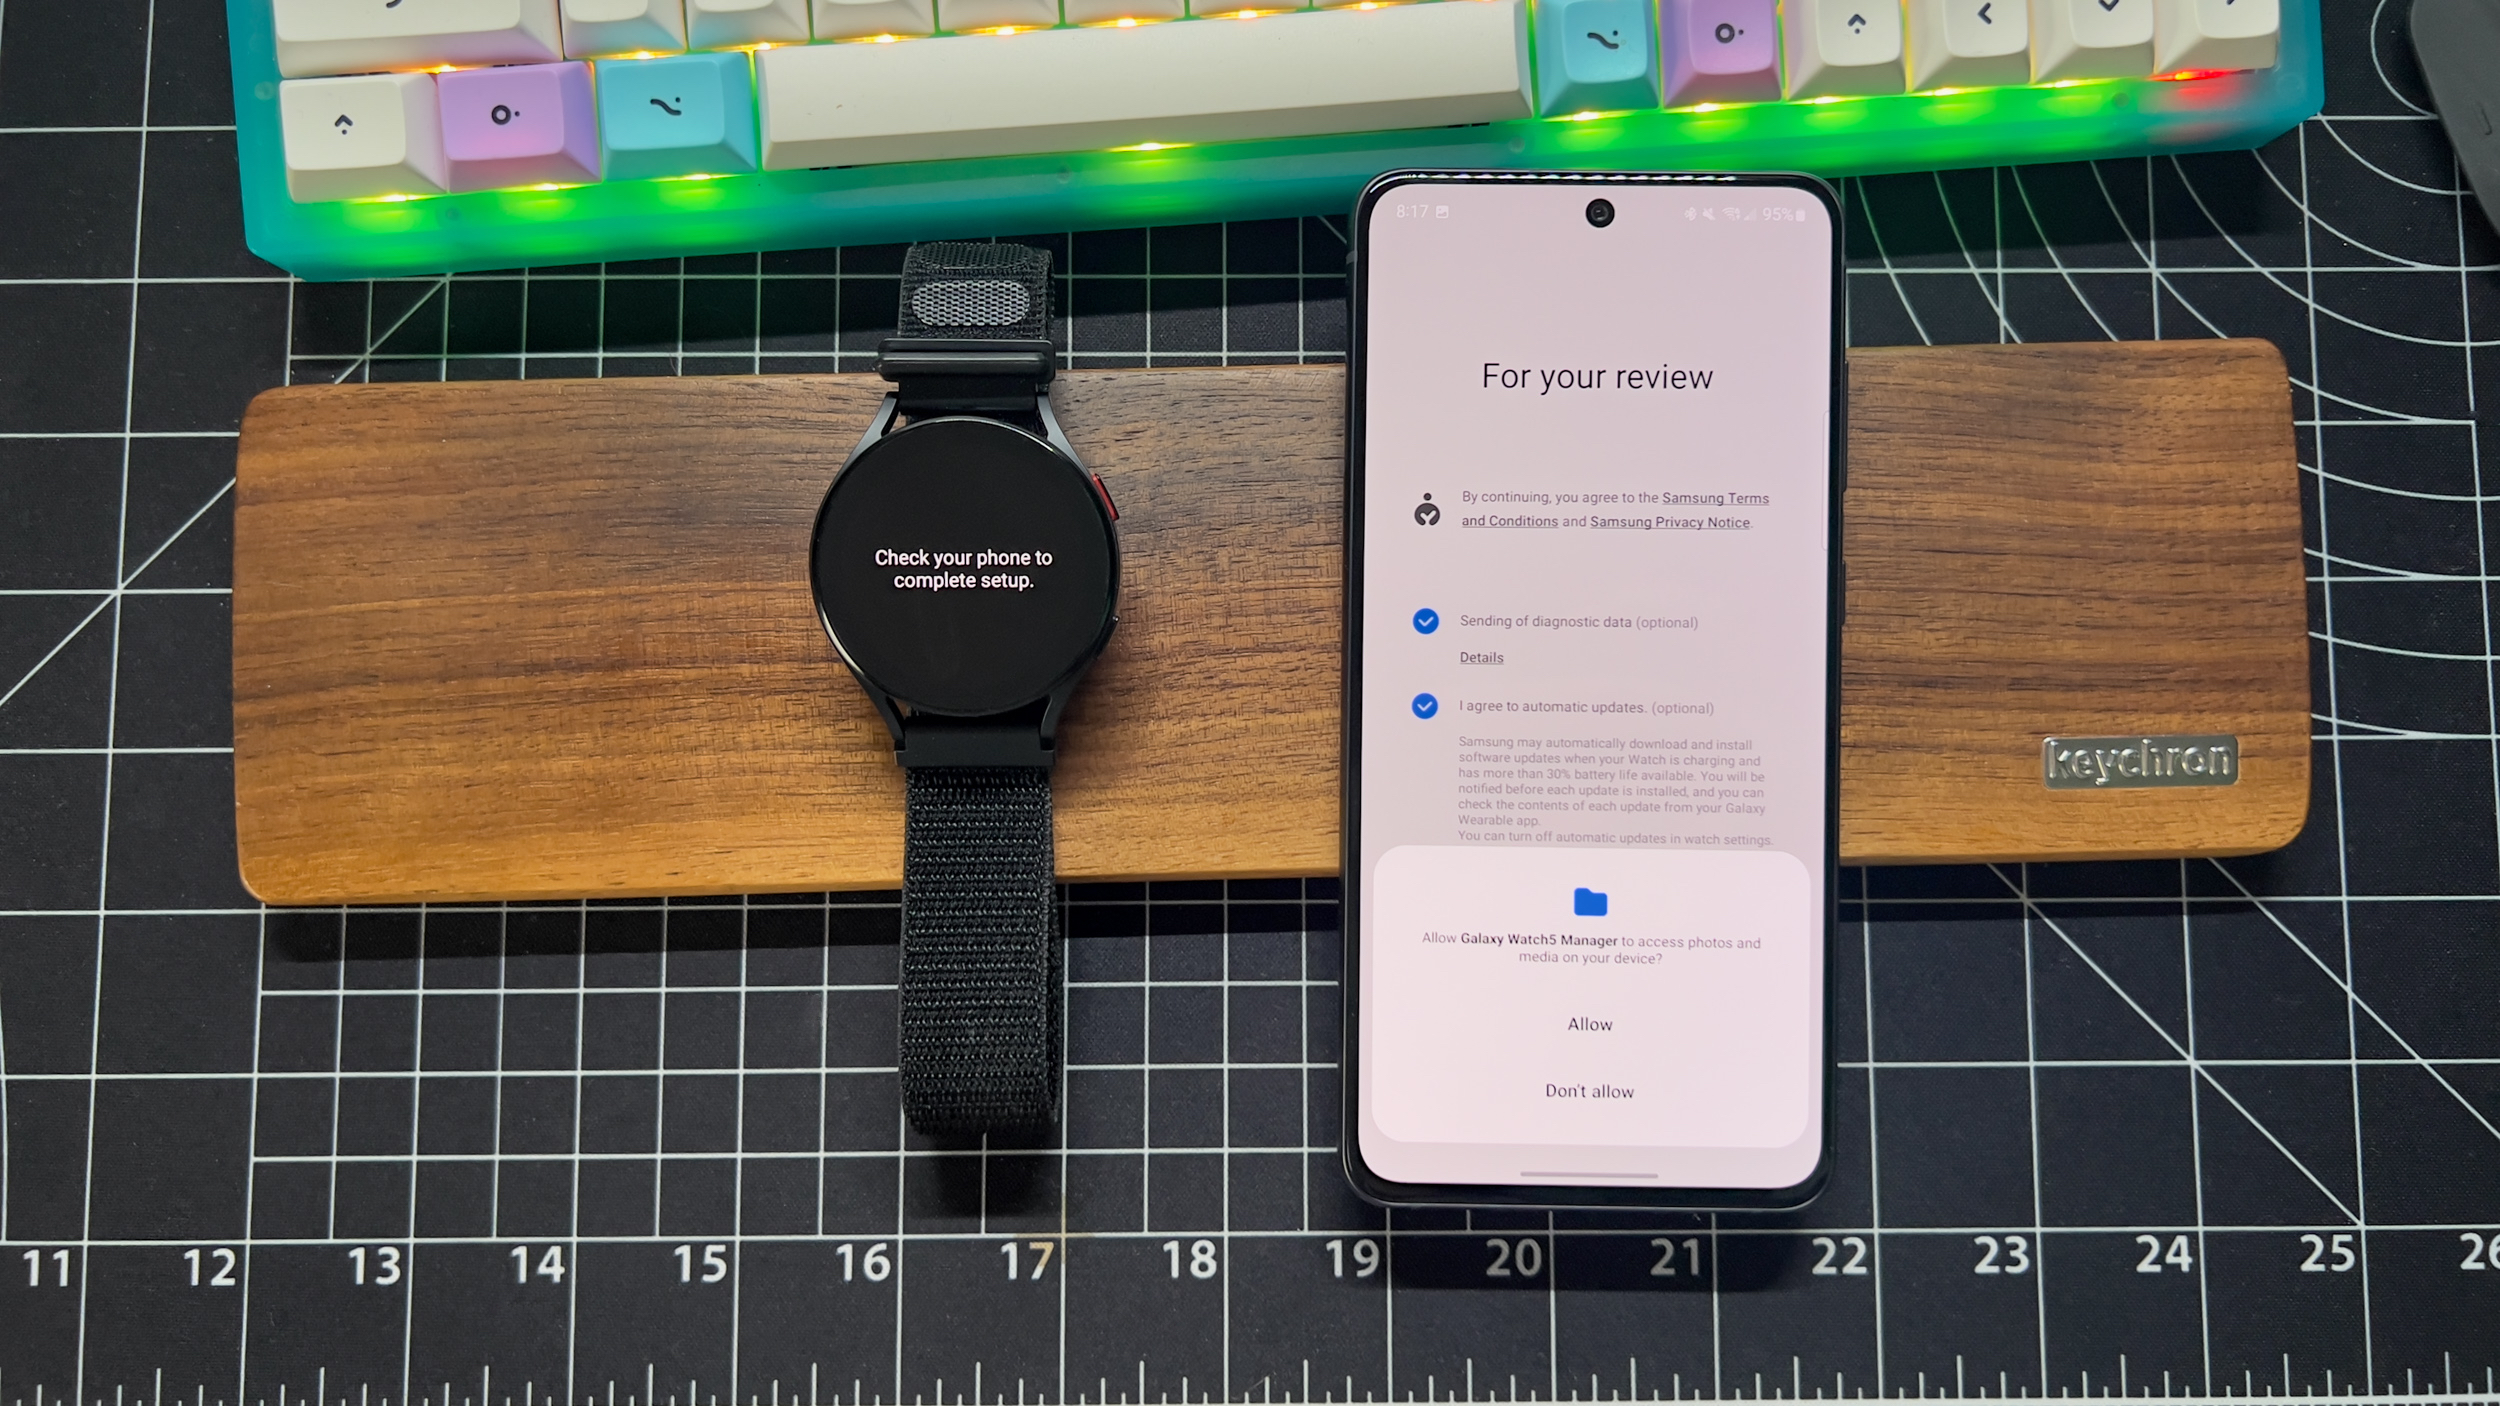 Provide Galaxy Watch 5 with access to media on Galaxy S21 FE